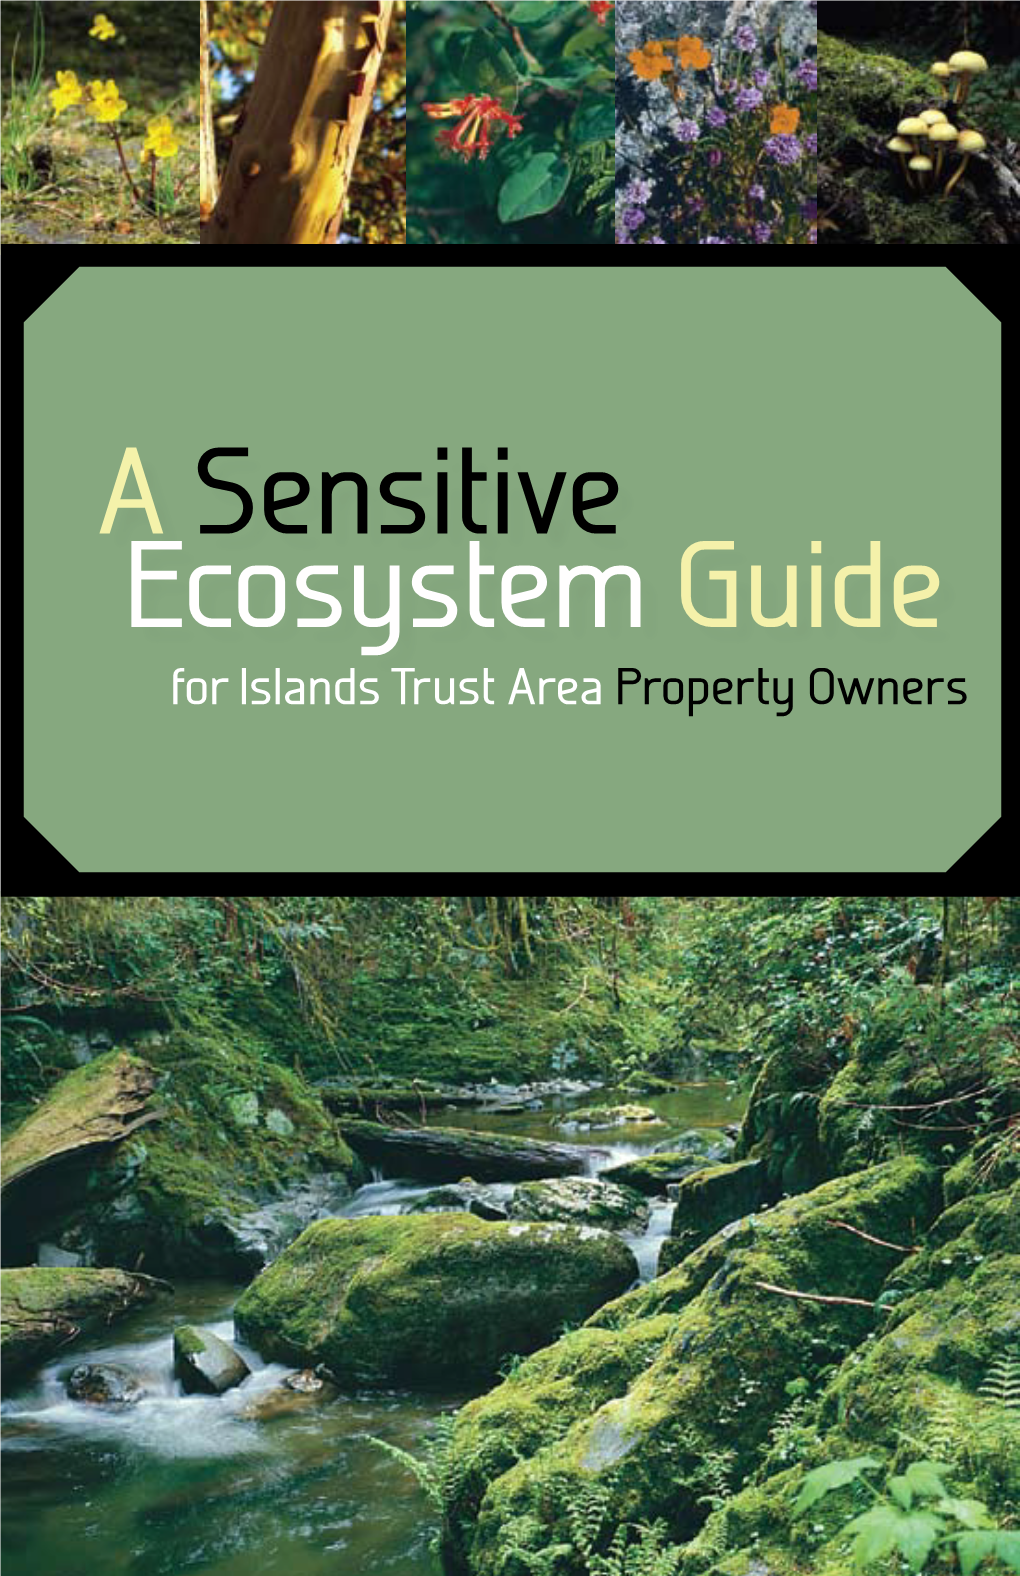 A Sensitive Ecosystem Guide for Islands Trust Area Property Owners